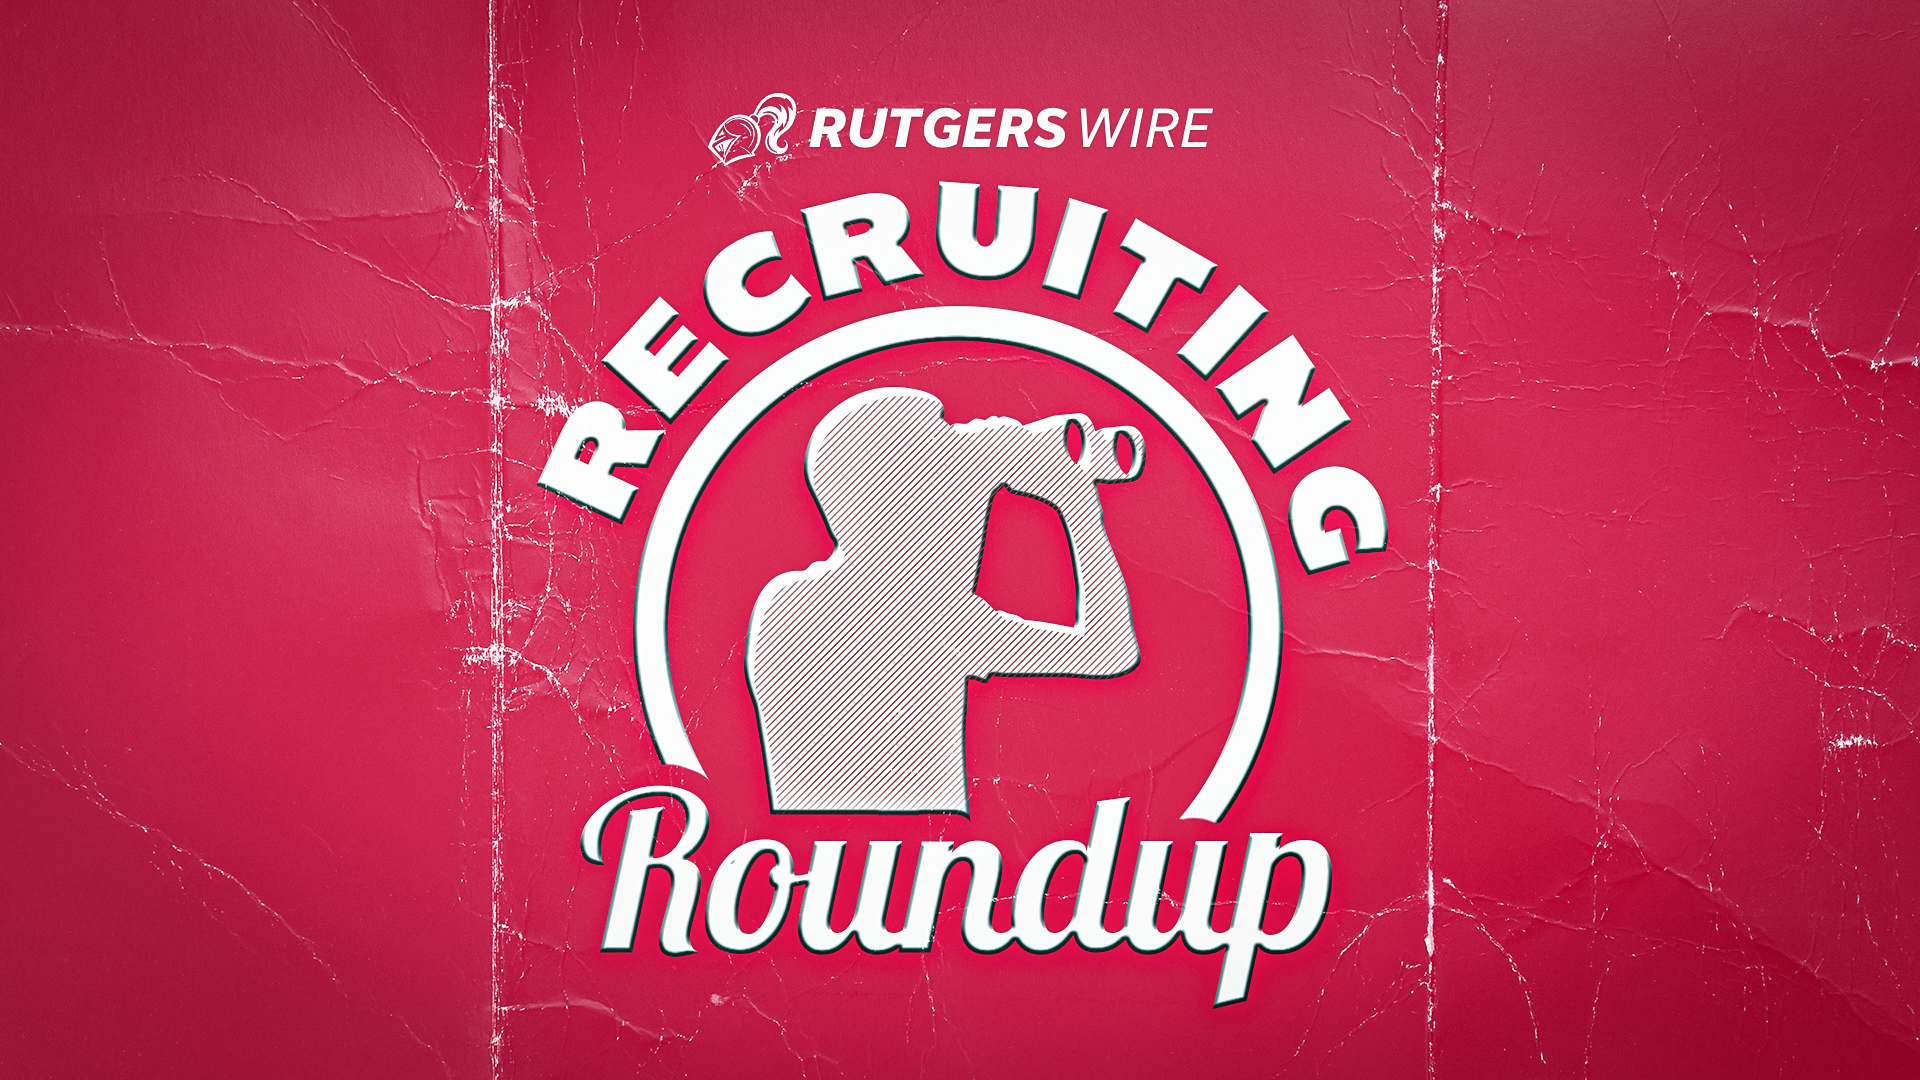 After nine commits this weekend, where does Rutgers football’s recruiting class rank?